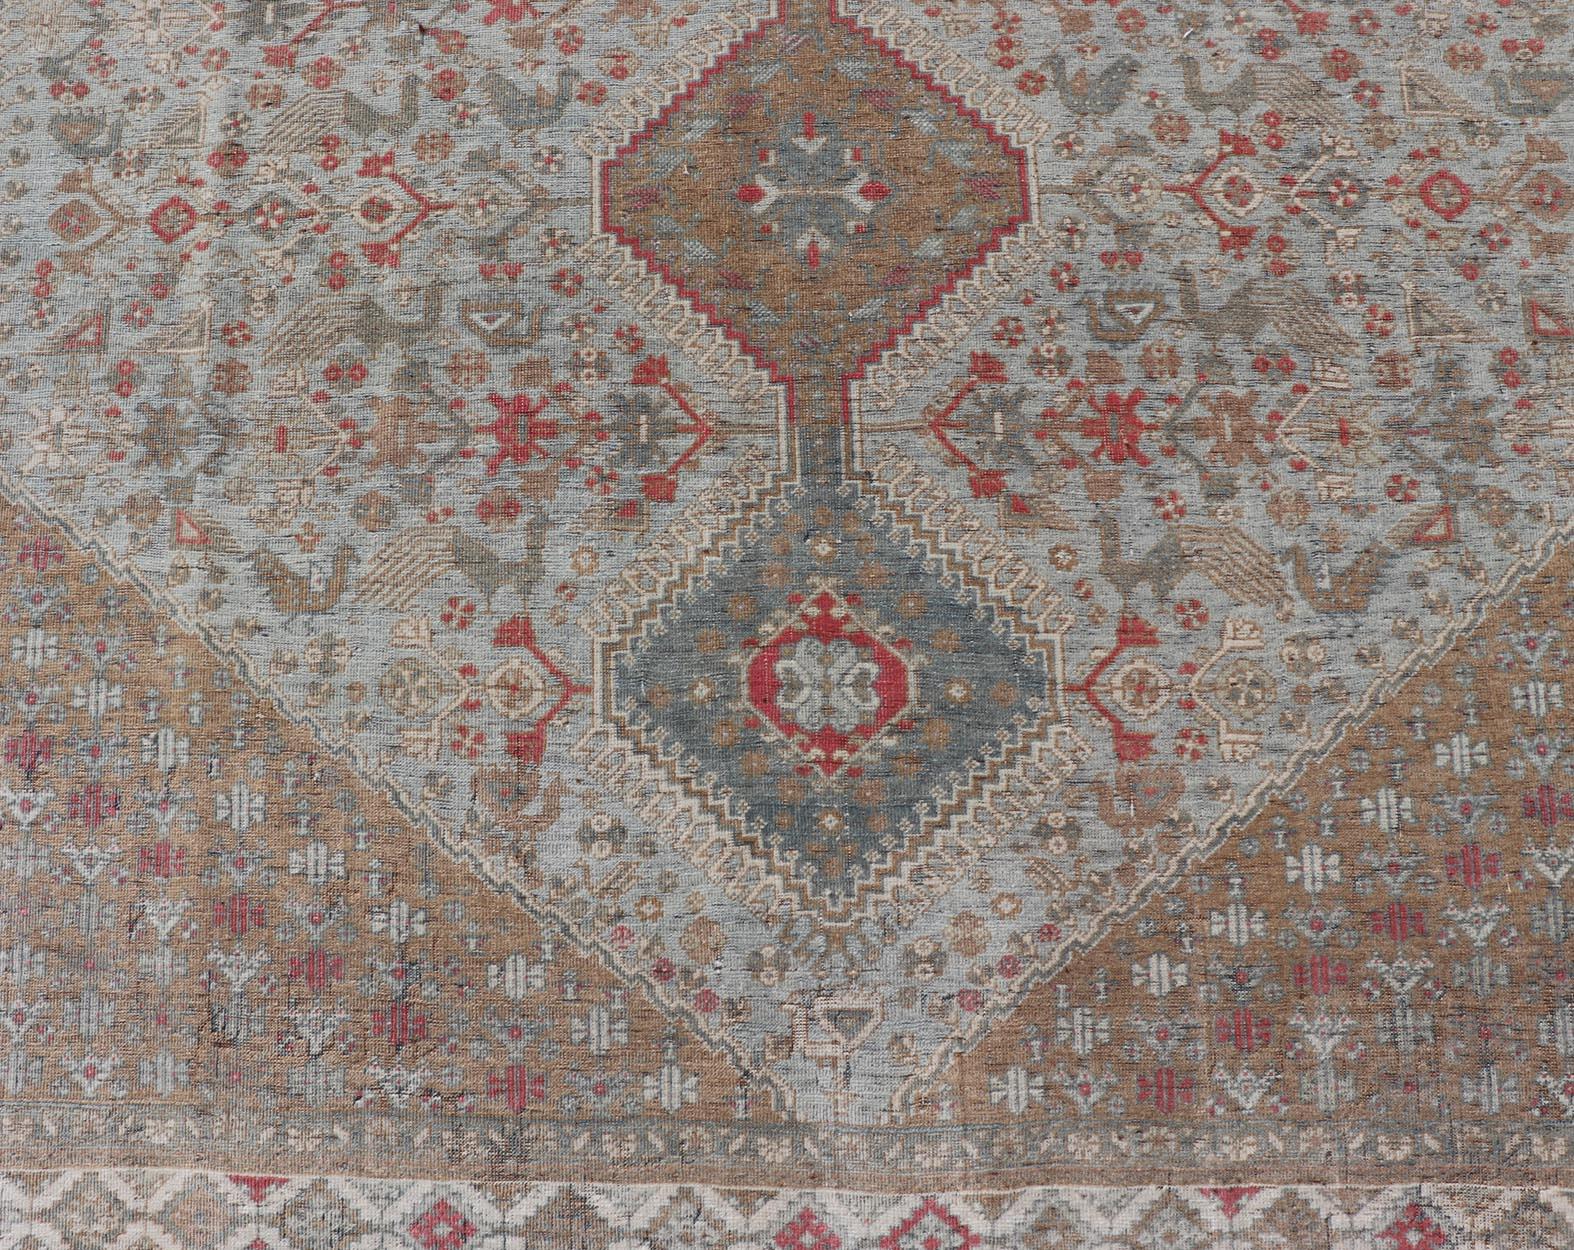  Antique Persian Qashgai Tribal Rug with stacked  diamond medallions and tribal  For Sale 3